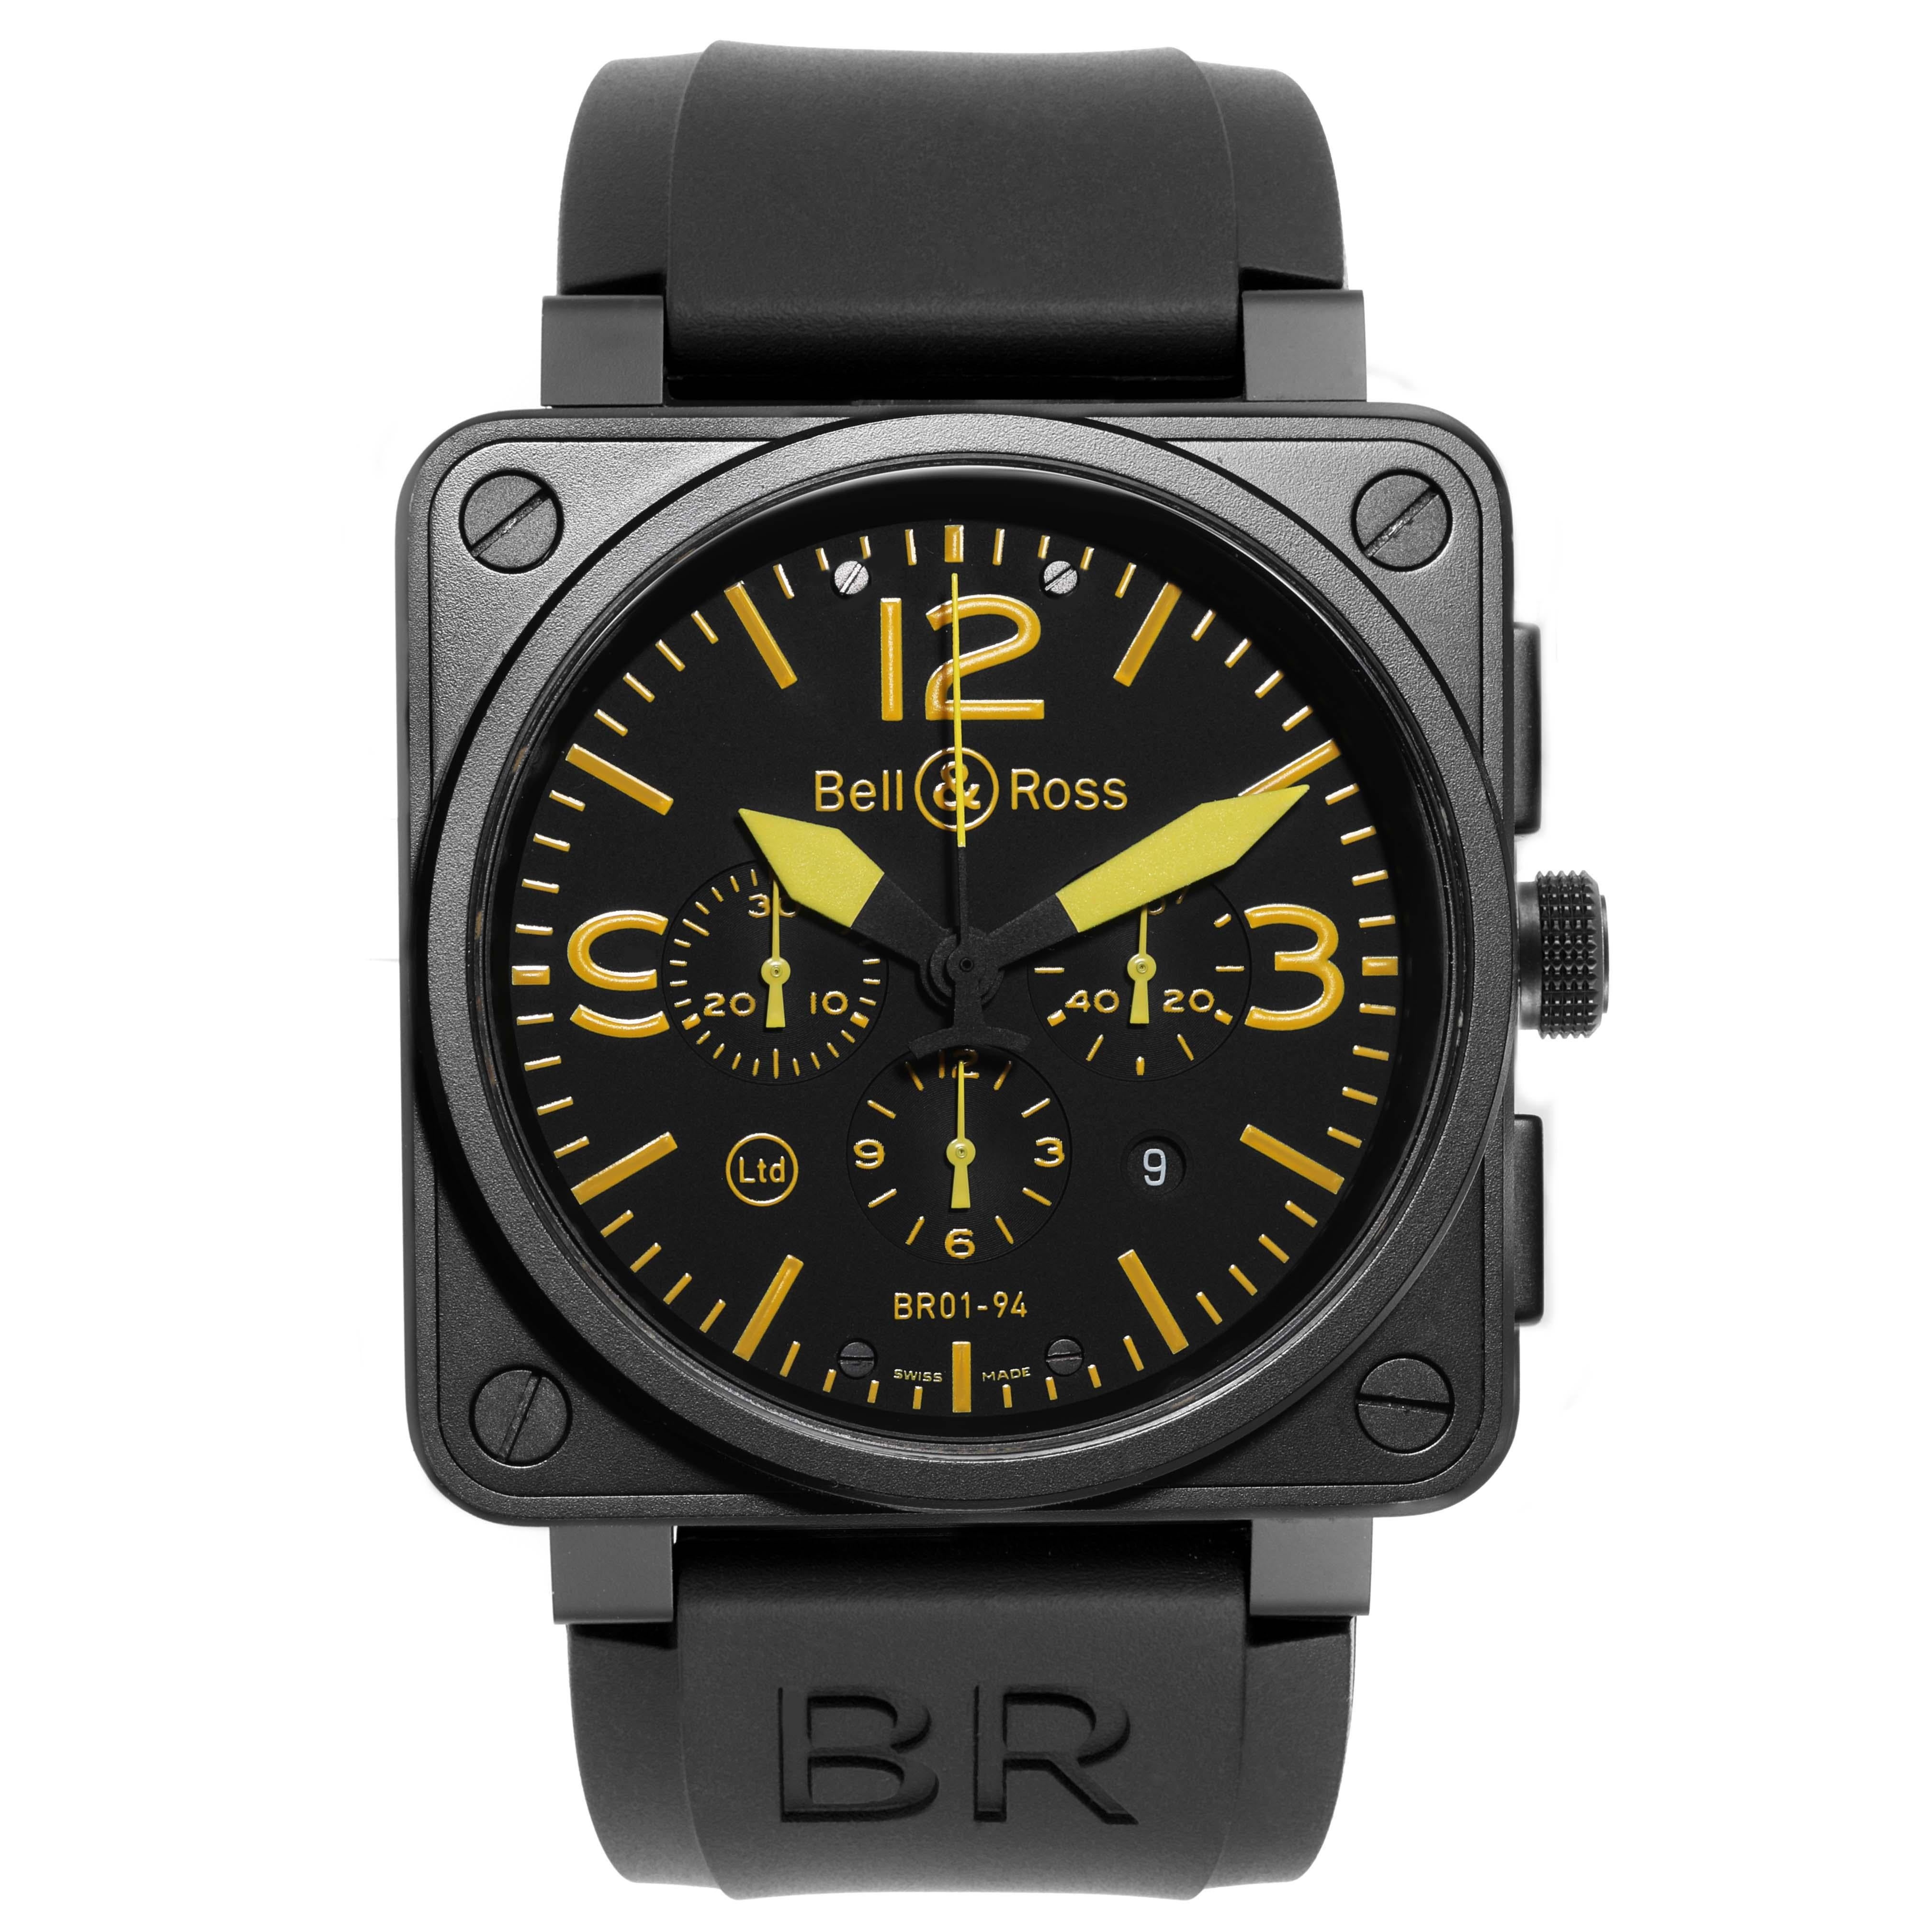 Bell & Ross Aviation Instrument Chronograph Steel Mens Watch BR0194 Box Card. Automatic self-winding chronograph movement. Matte black steel square case 46.0 mm in diameter. Matte black steel smooth bezel. Scratch resistant sapphire crystal. Black